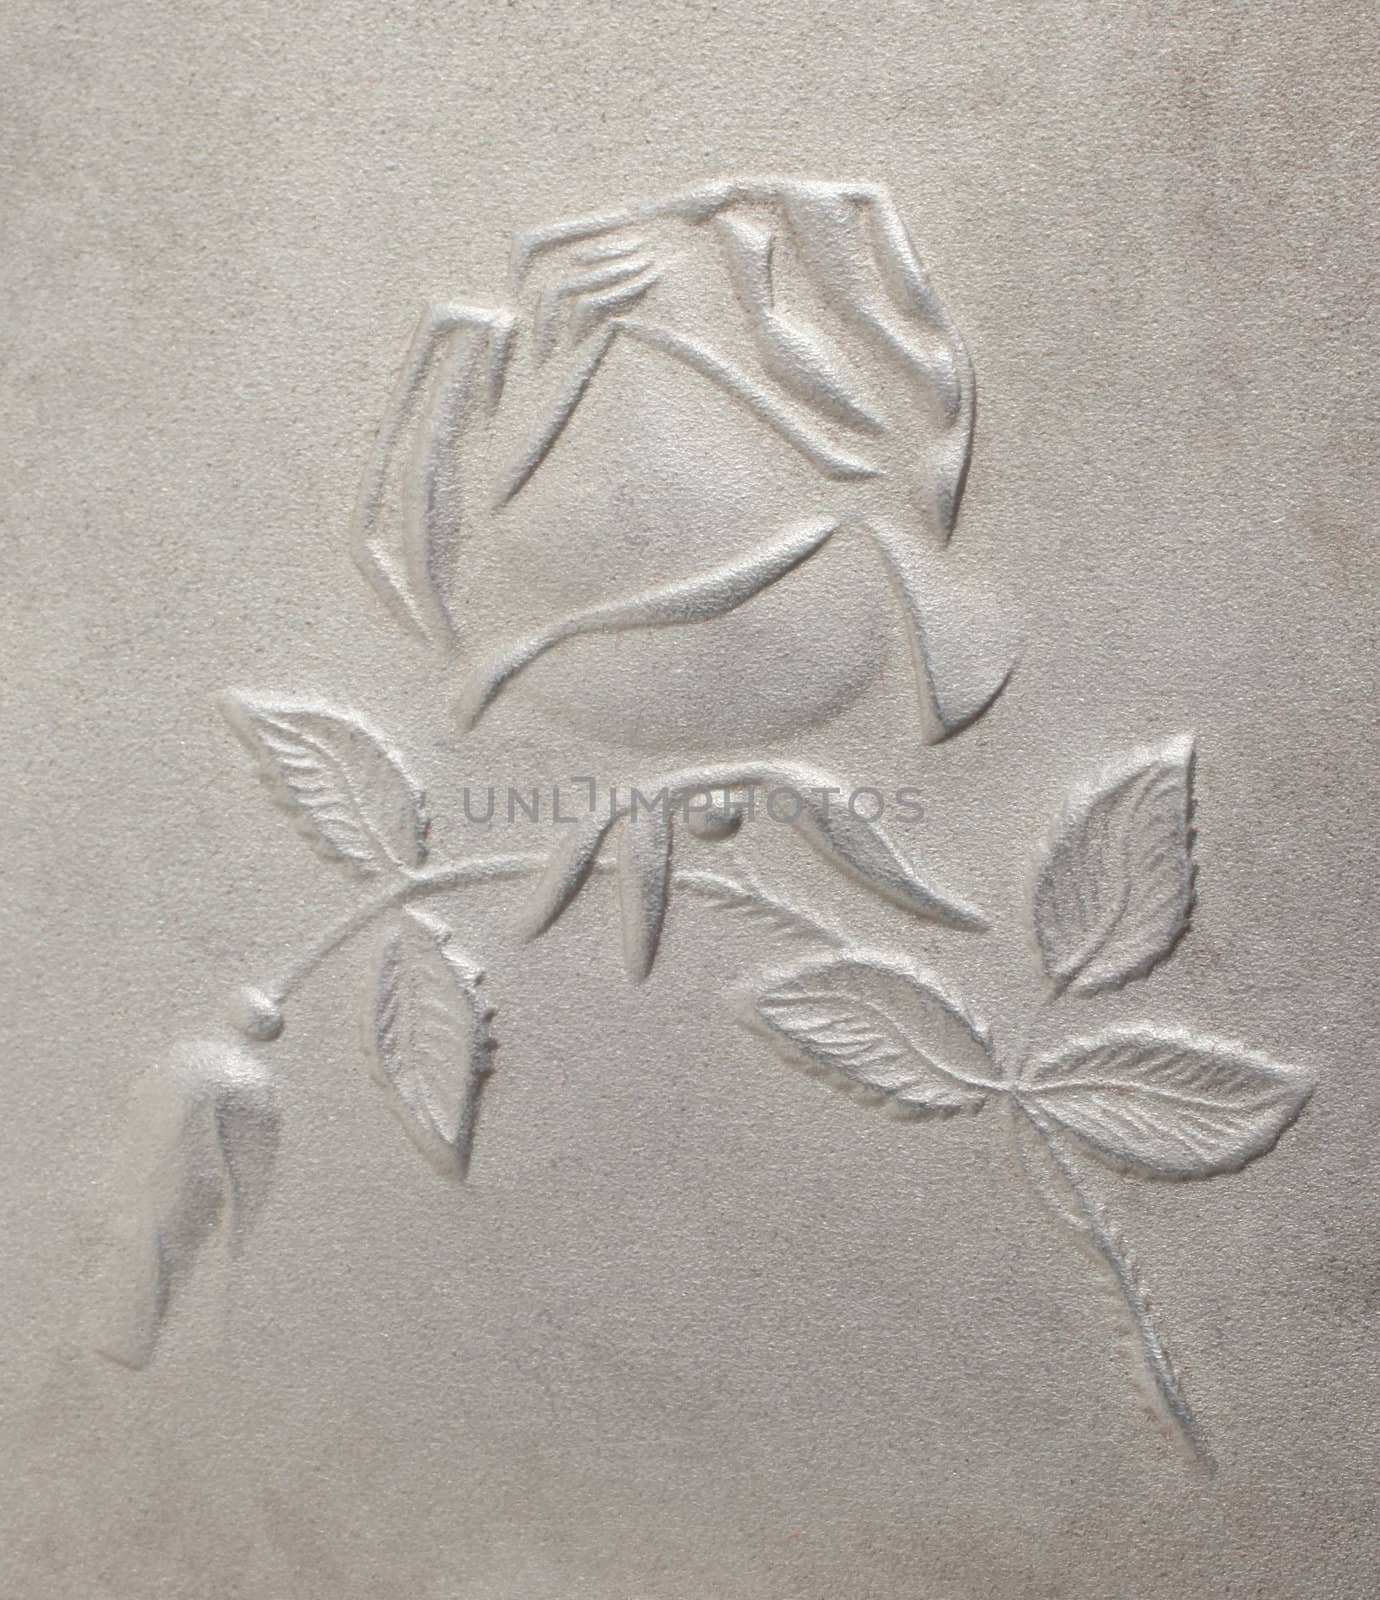 bas-relief depicting roses on the metal by skutin